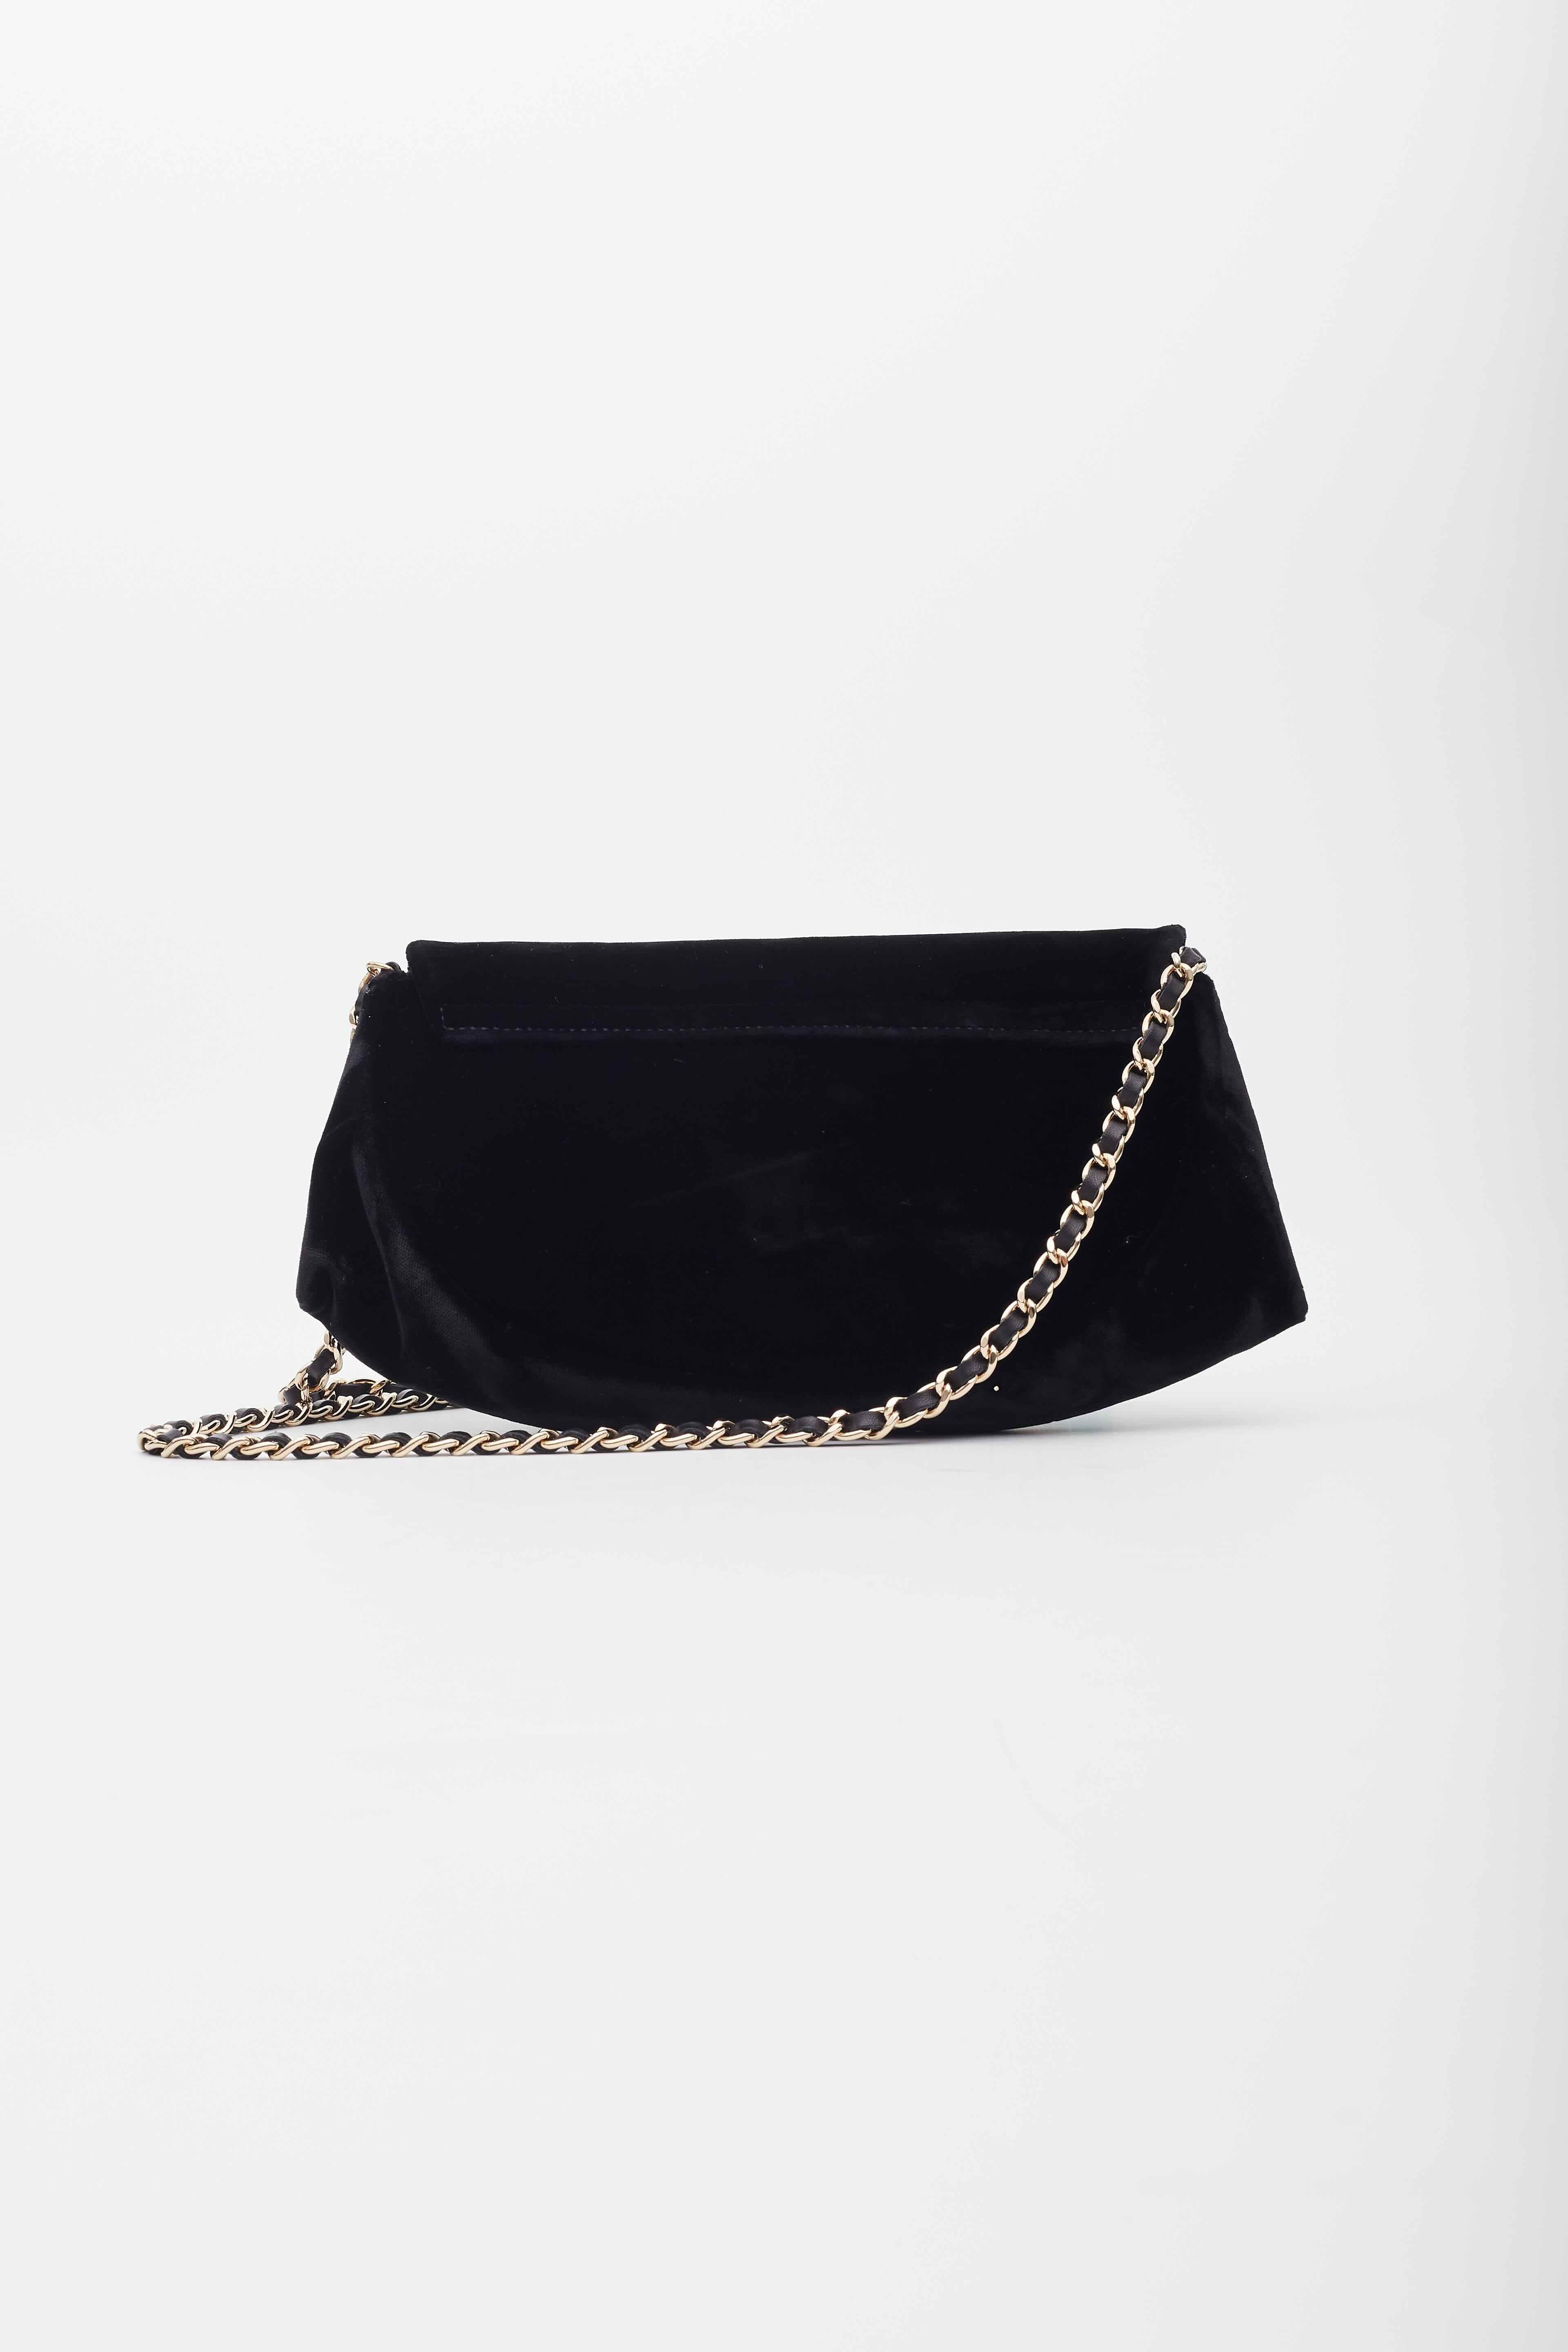 This wallet on a chain is beautifully crafted of luxurious velvet in black. The cross body bag features a below the waist polished gold chain link shoulder strap threaded with black leather and a front flap with a quilted Chanel CC logo. The flap